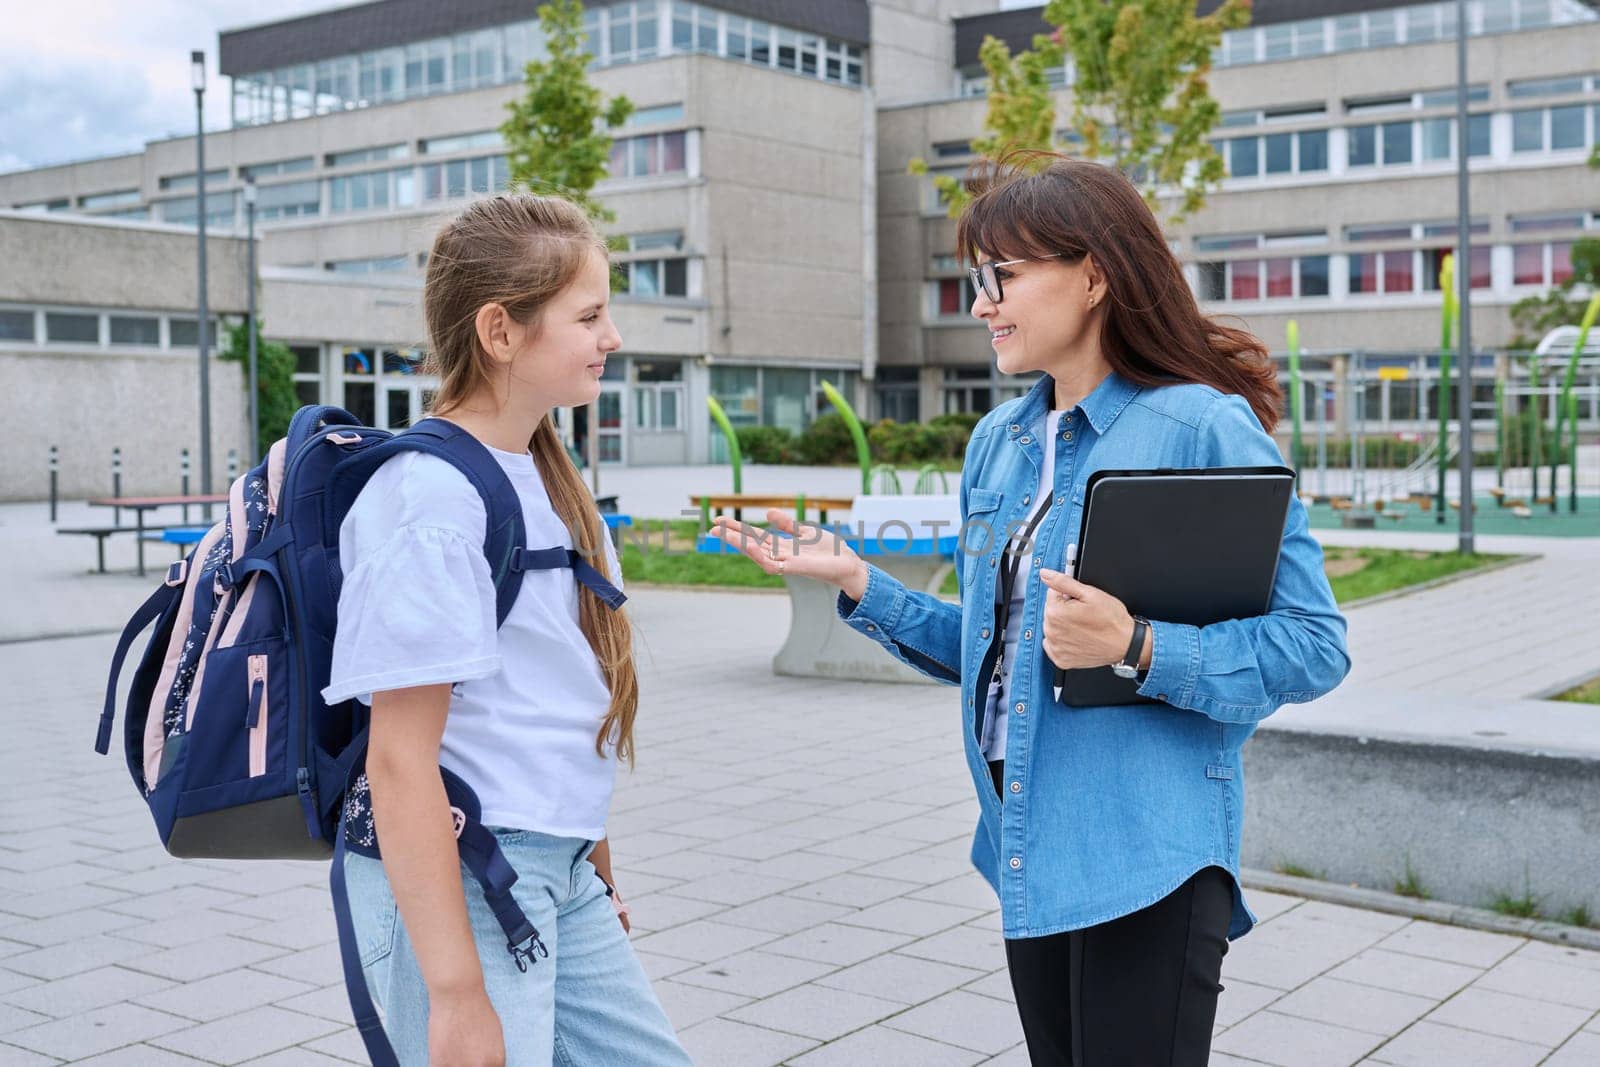 Talking female teacher and schoolgirl child outdoor, school building background. Meeting communication student girl with backpack and mentor counselor. Education, pre-teenage, learning, back to school